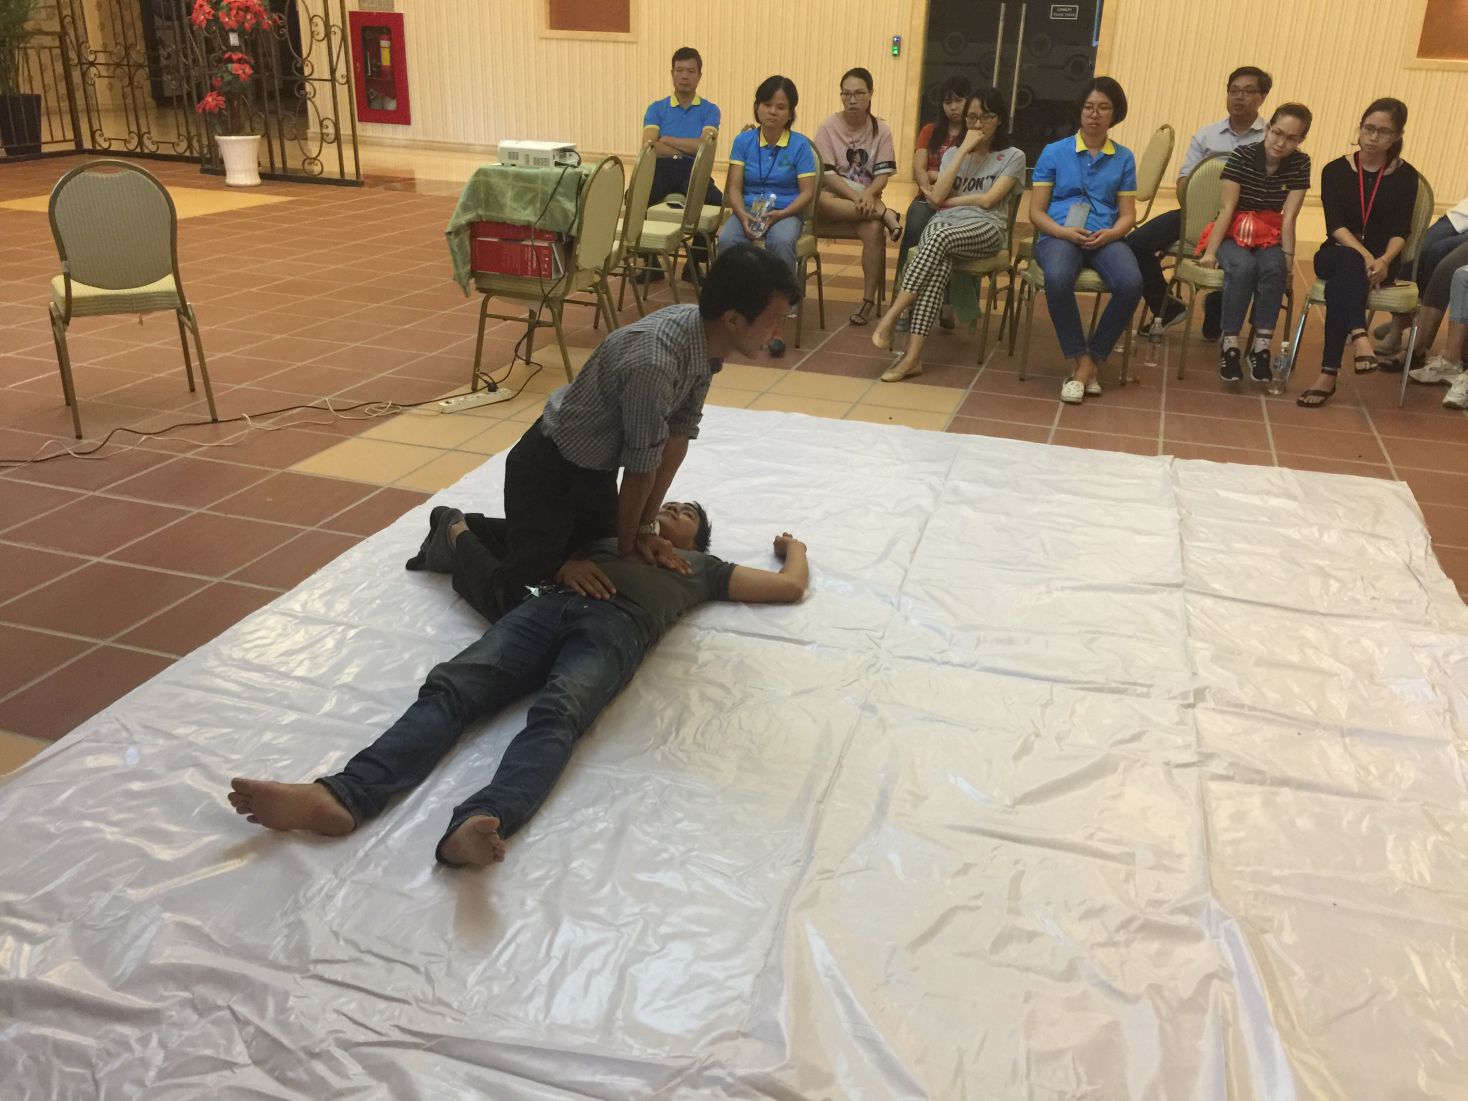 First Aid Training - August 24, 2019